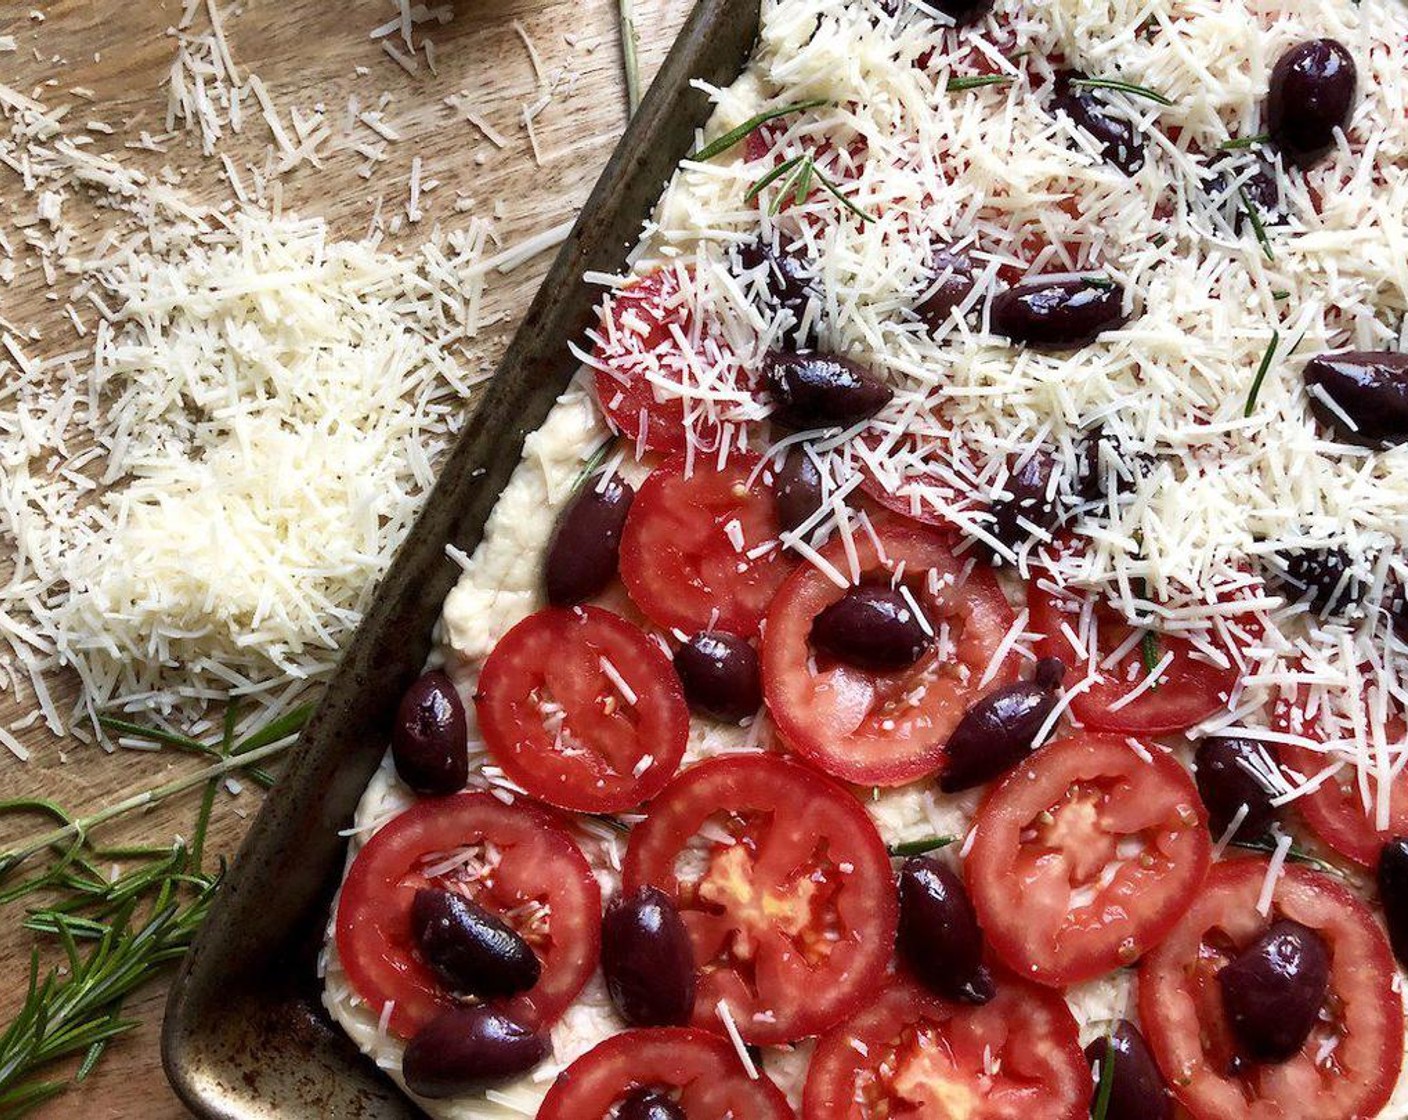 step 5 Brush the top of the dough generously with Extra-Virgin Olive Oil (as needed).  Sprinkle with half of the Asiago Cheese (2/3 cup) and Rosemary Leaves (1/2 Tbsp). Arrange the Plum Tomatoes (3) in a single layer on top of the cheese. Place the Kalamata Olives (1/2 cup) evenly over the tomato slices.